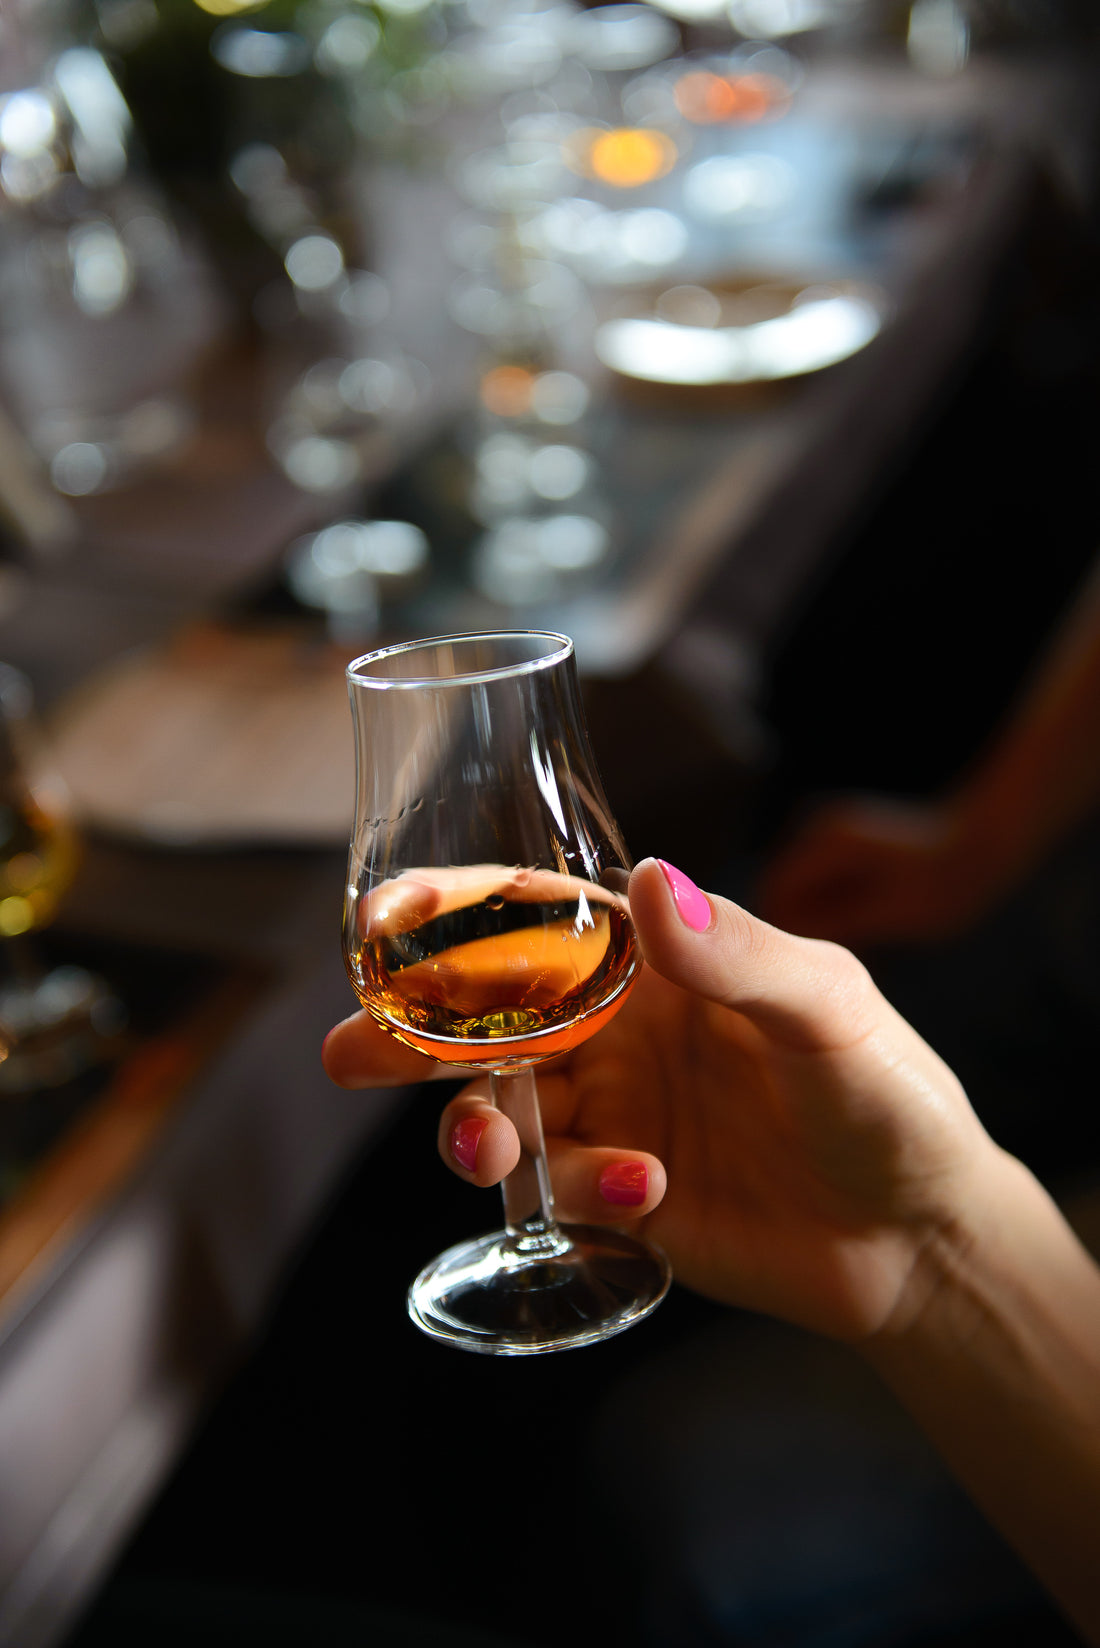  Women In Whiskey - Not Just A New Trend